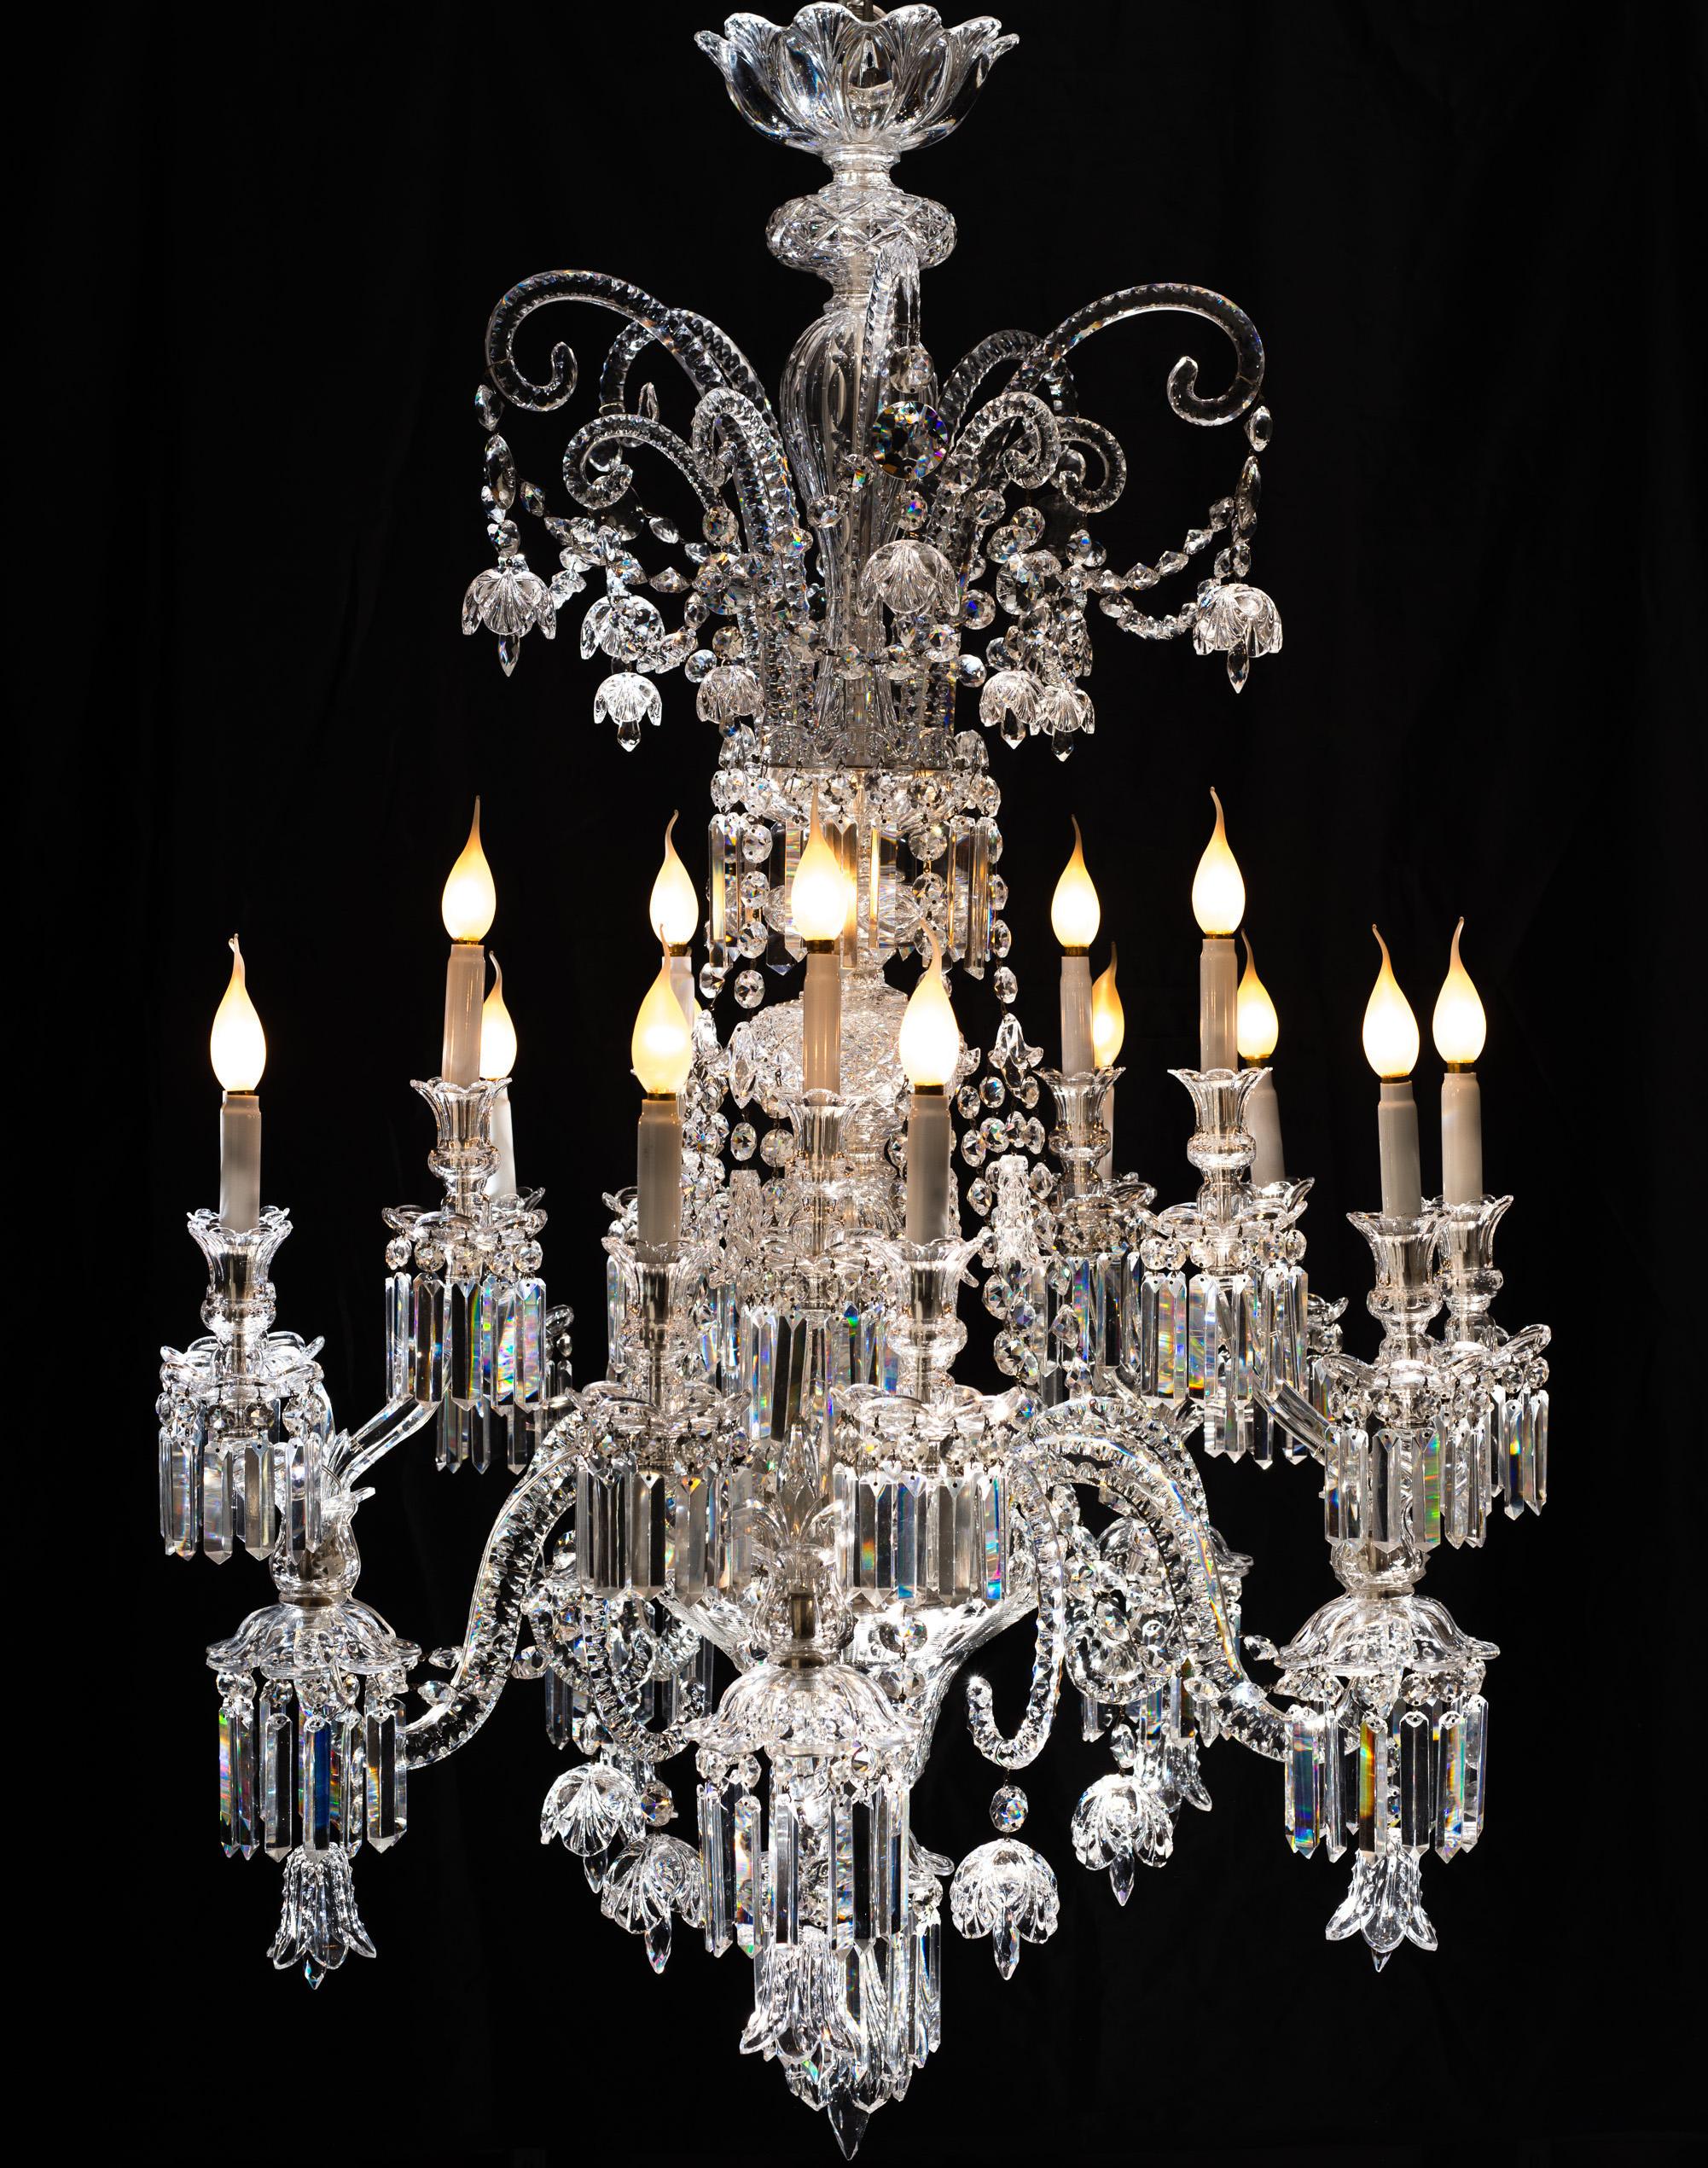 Outstanding and rare original baccarat chandelier. The supporting structure is made of silver plated brass. The central rod is solid iron. The chandelier states no signing because at that time (1825) the Baccarat did not sign their productions.